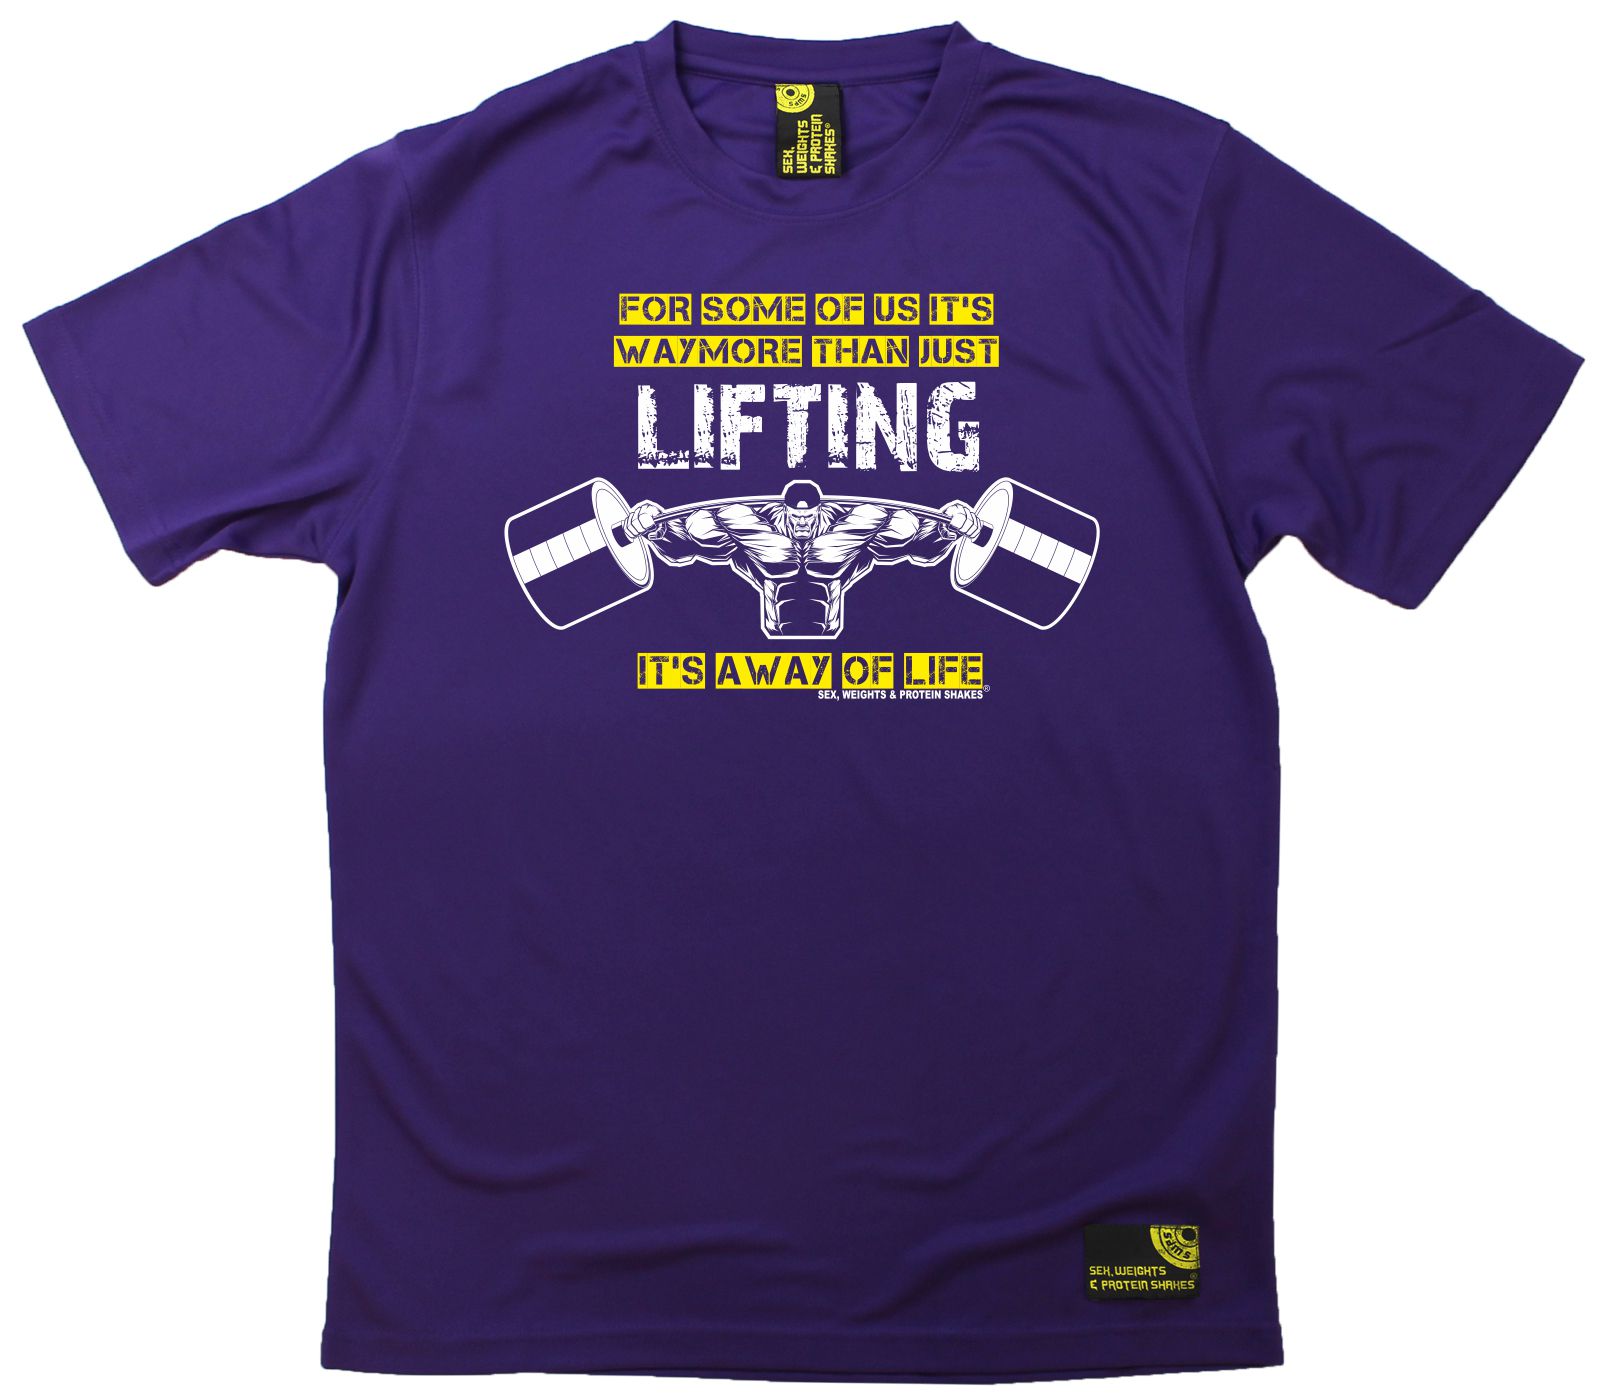 Men Sex Weights And Protein Shakes Lifting A Way Of Life Dry Fit Sports T Shirt Ebay 0964